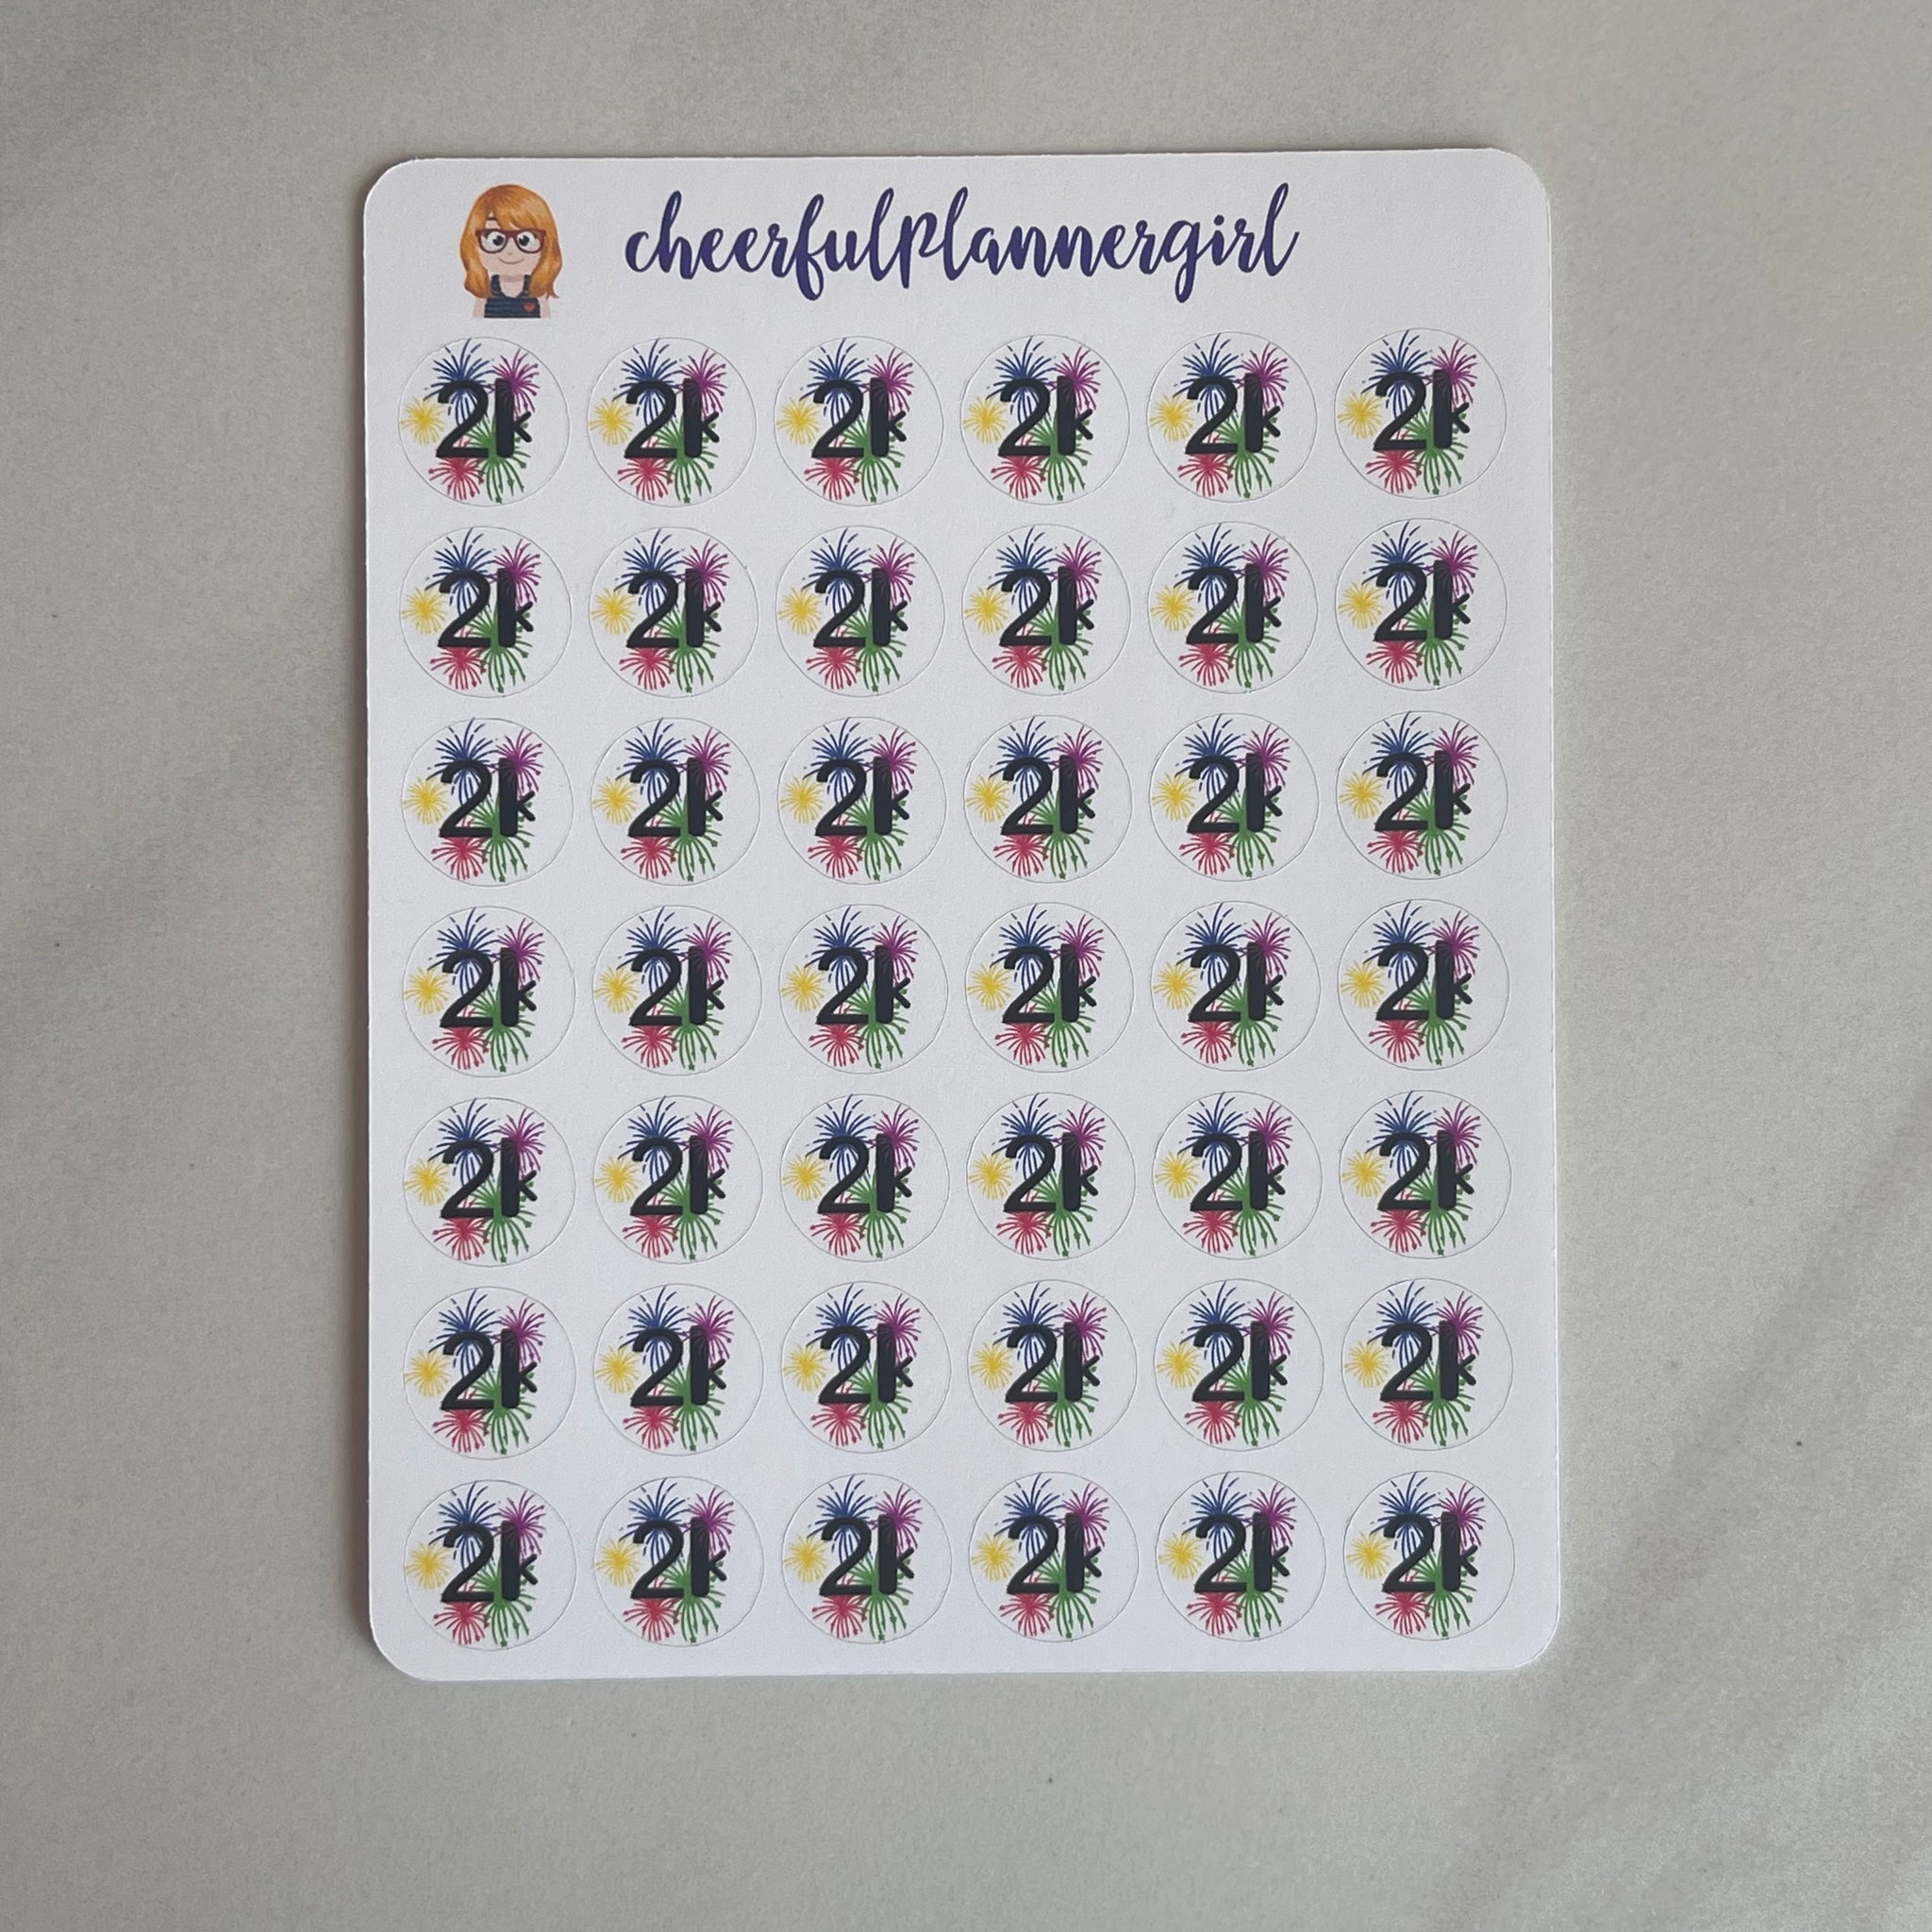 2k Step Goal Planner Stickers